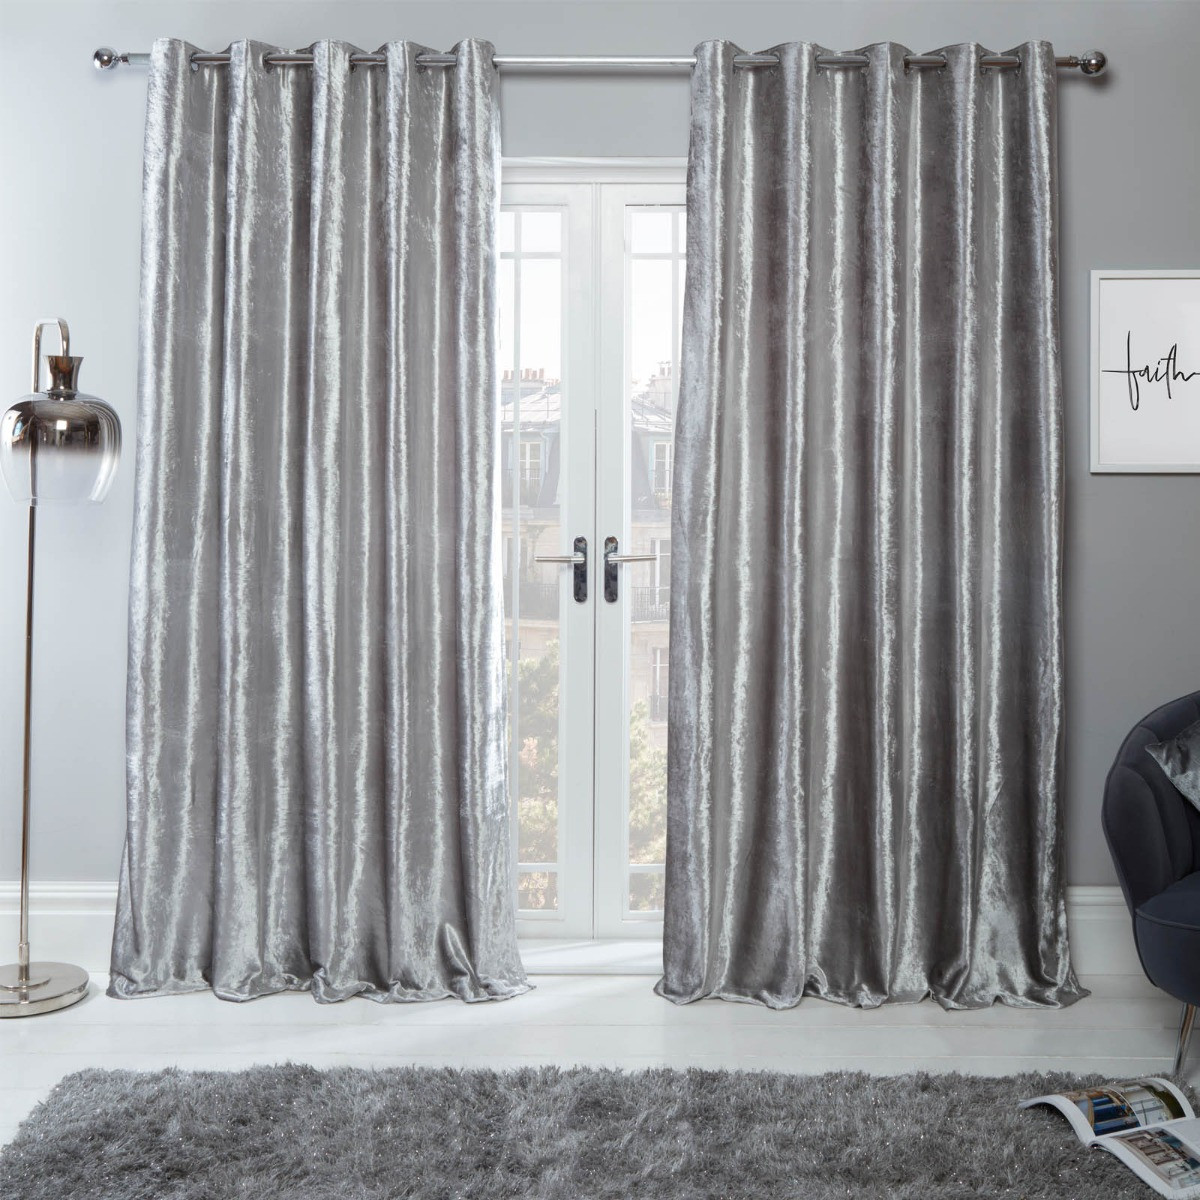 Sienna Home Crushed Velvet Eyelet Curtains - Silver 46" x 72">